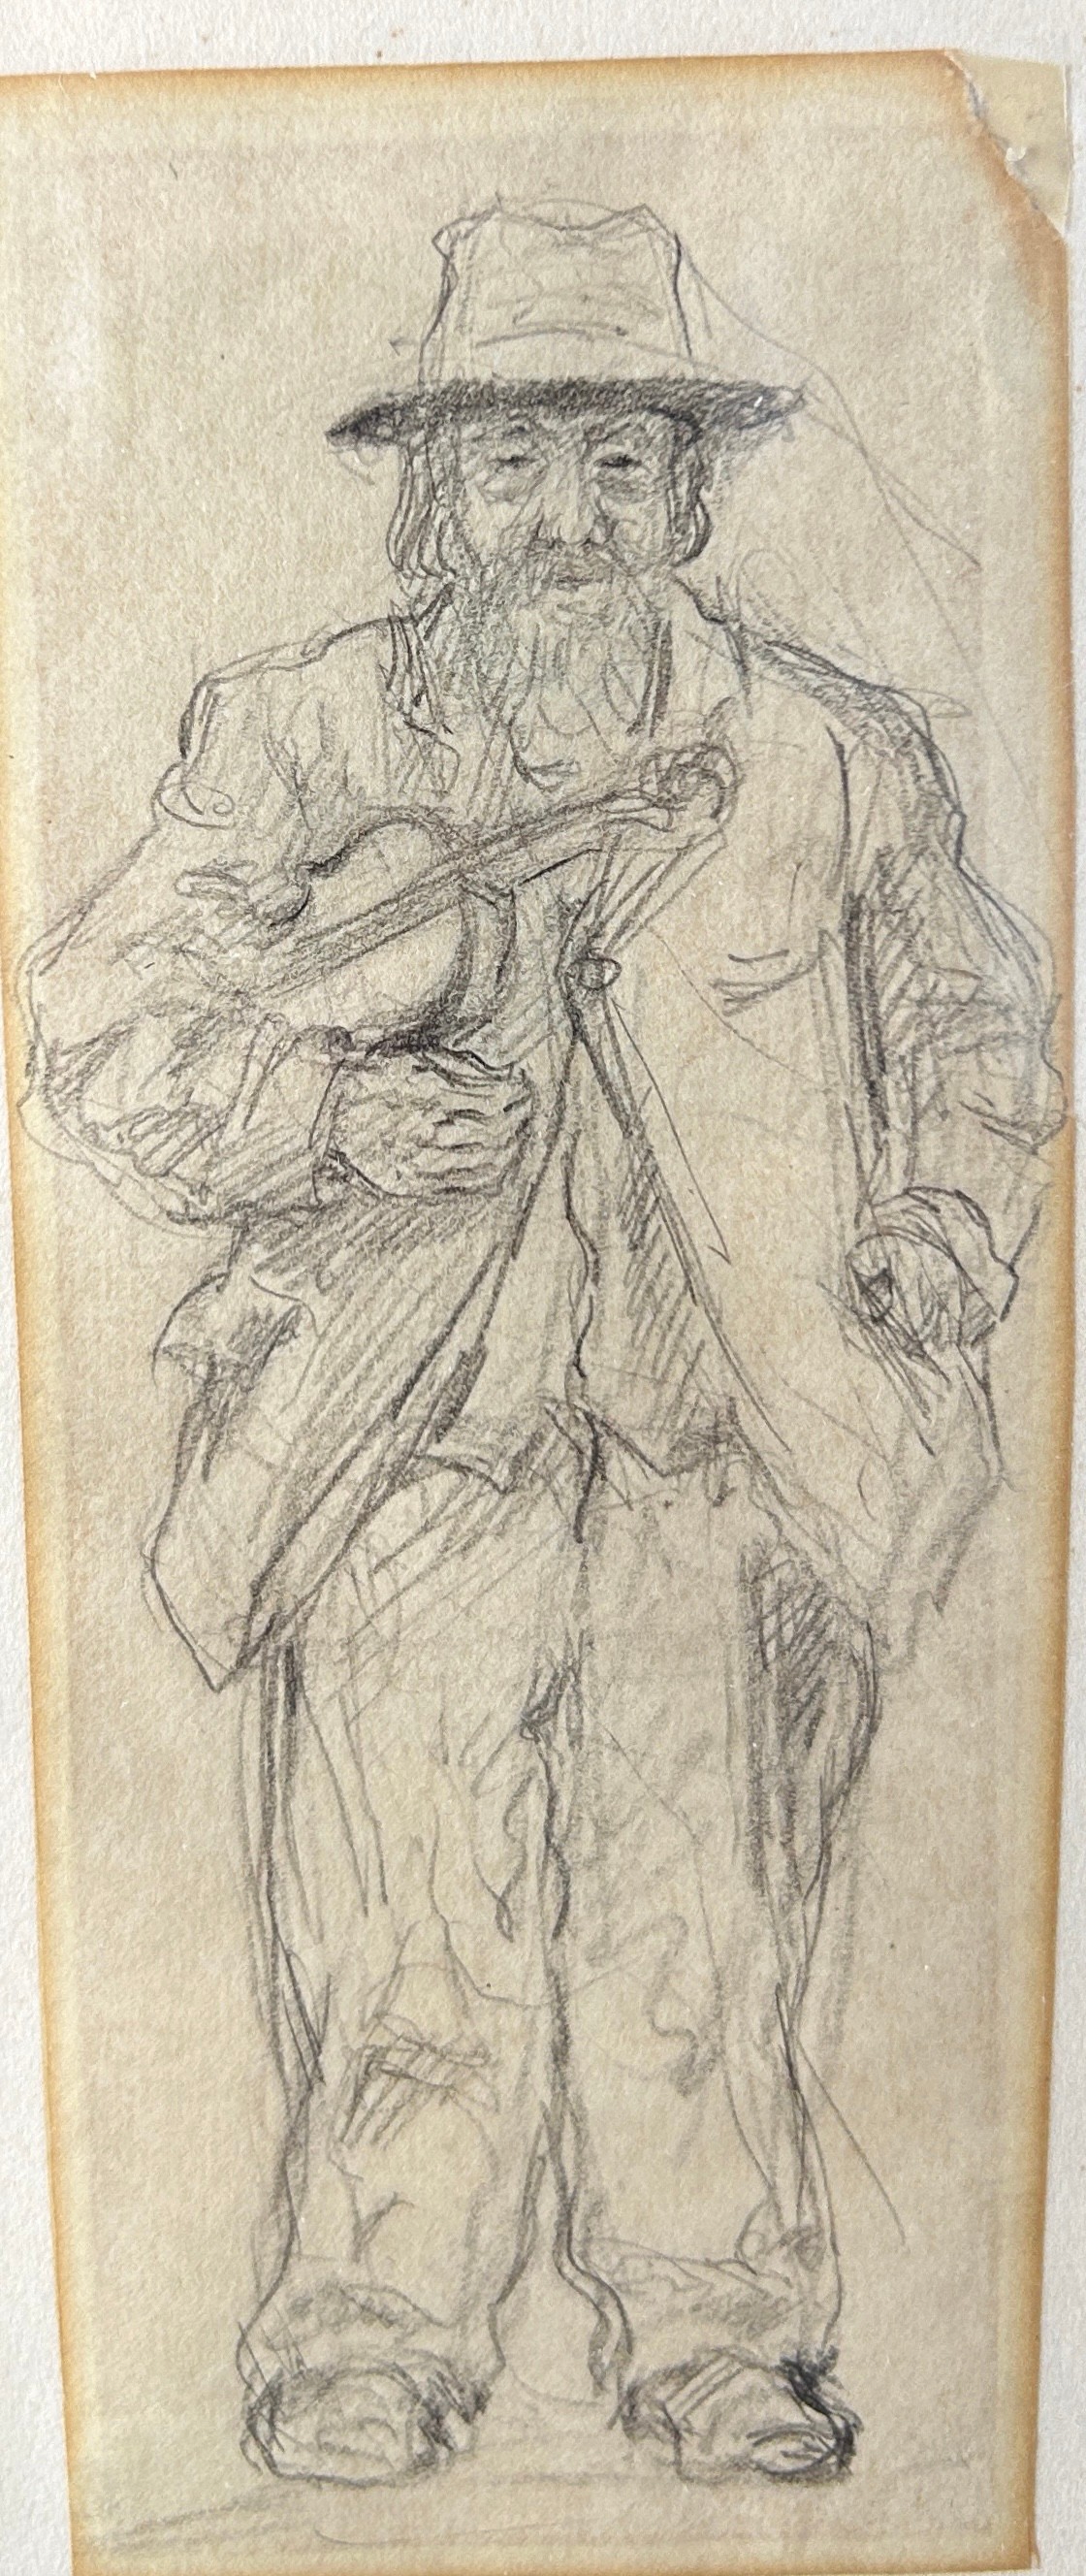 HENRY WINSLOW (1874 - 1955) DRAWING OF A MUSICIAN WITH A VIOLIN. 16cm x 6cm Mounted in a frame and